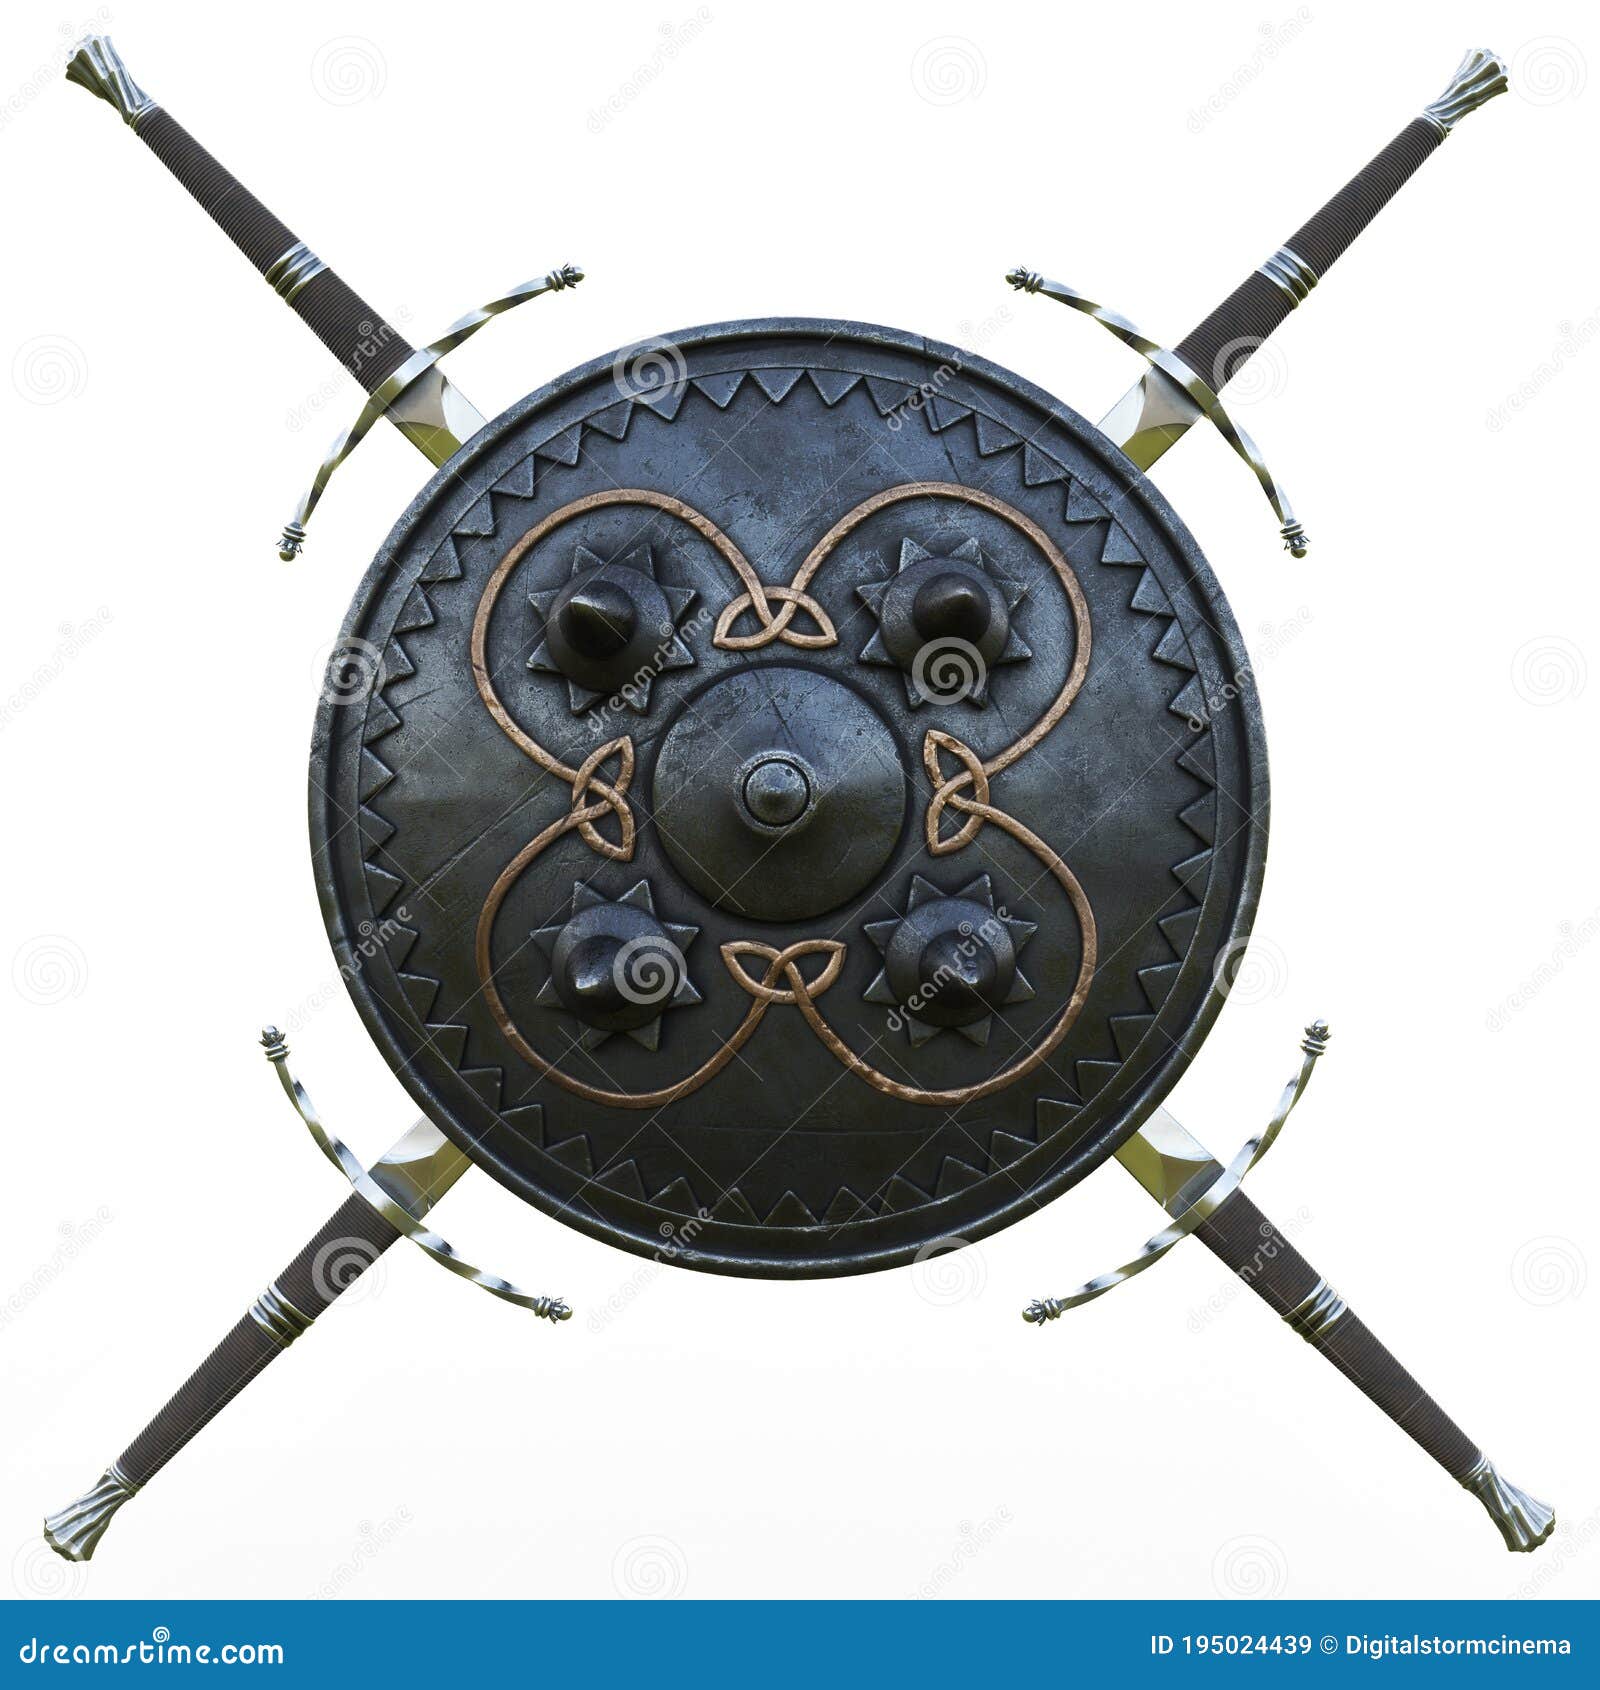 metal round shield with decorative s flanked by swords.